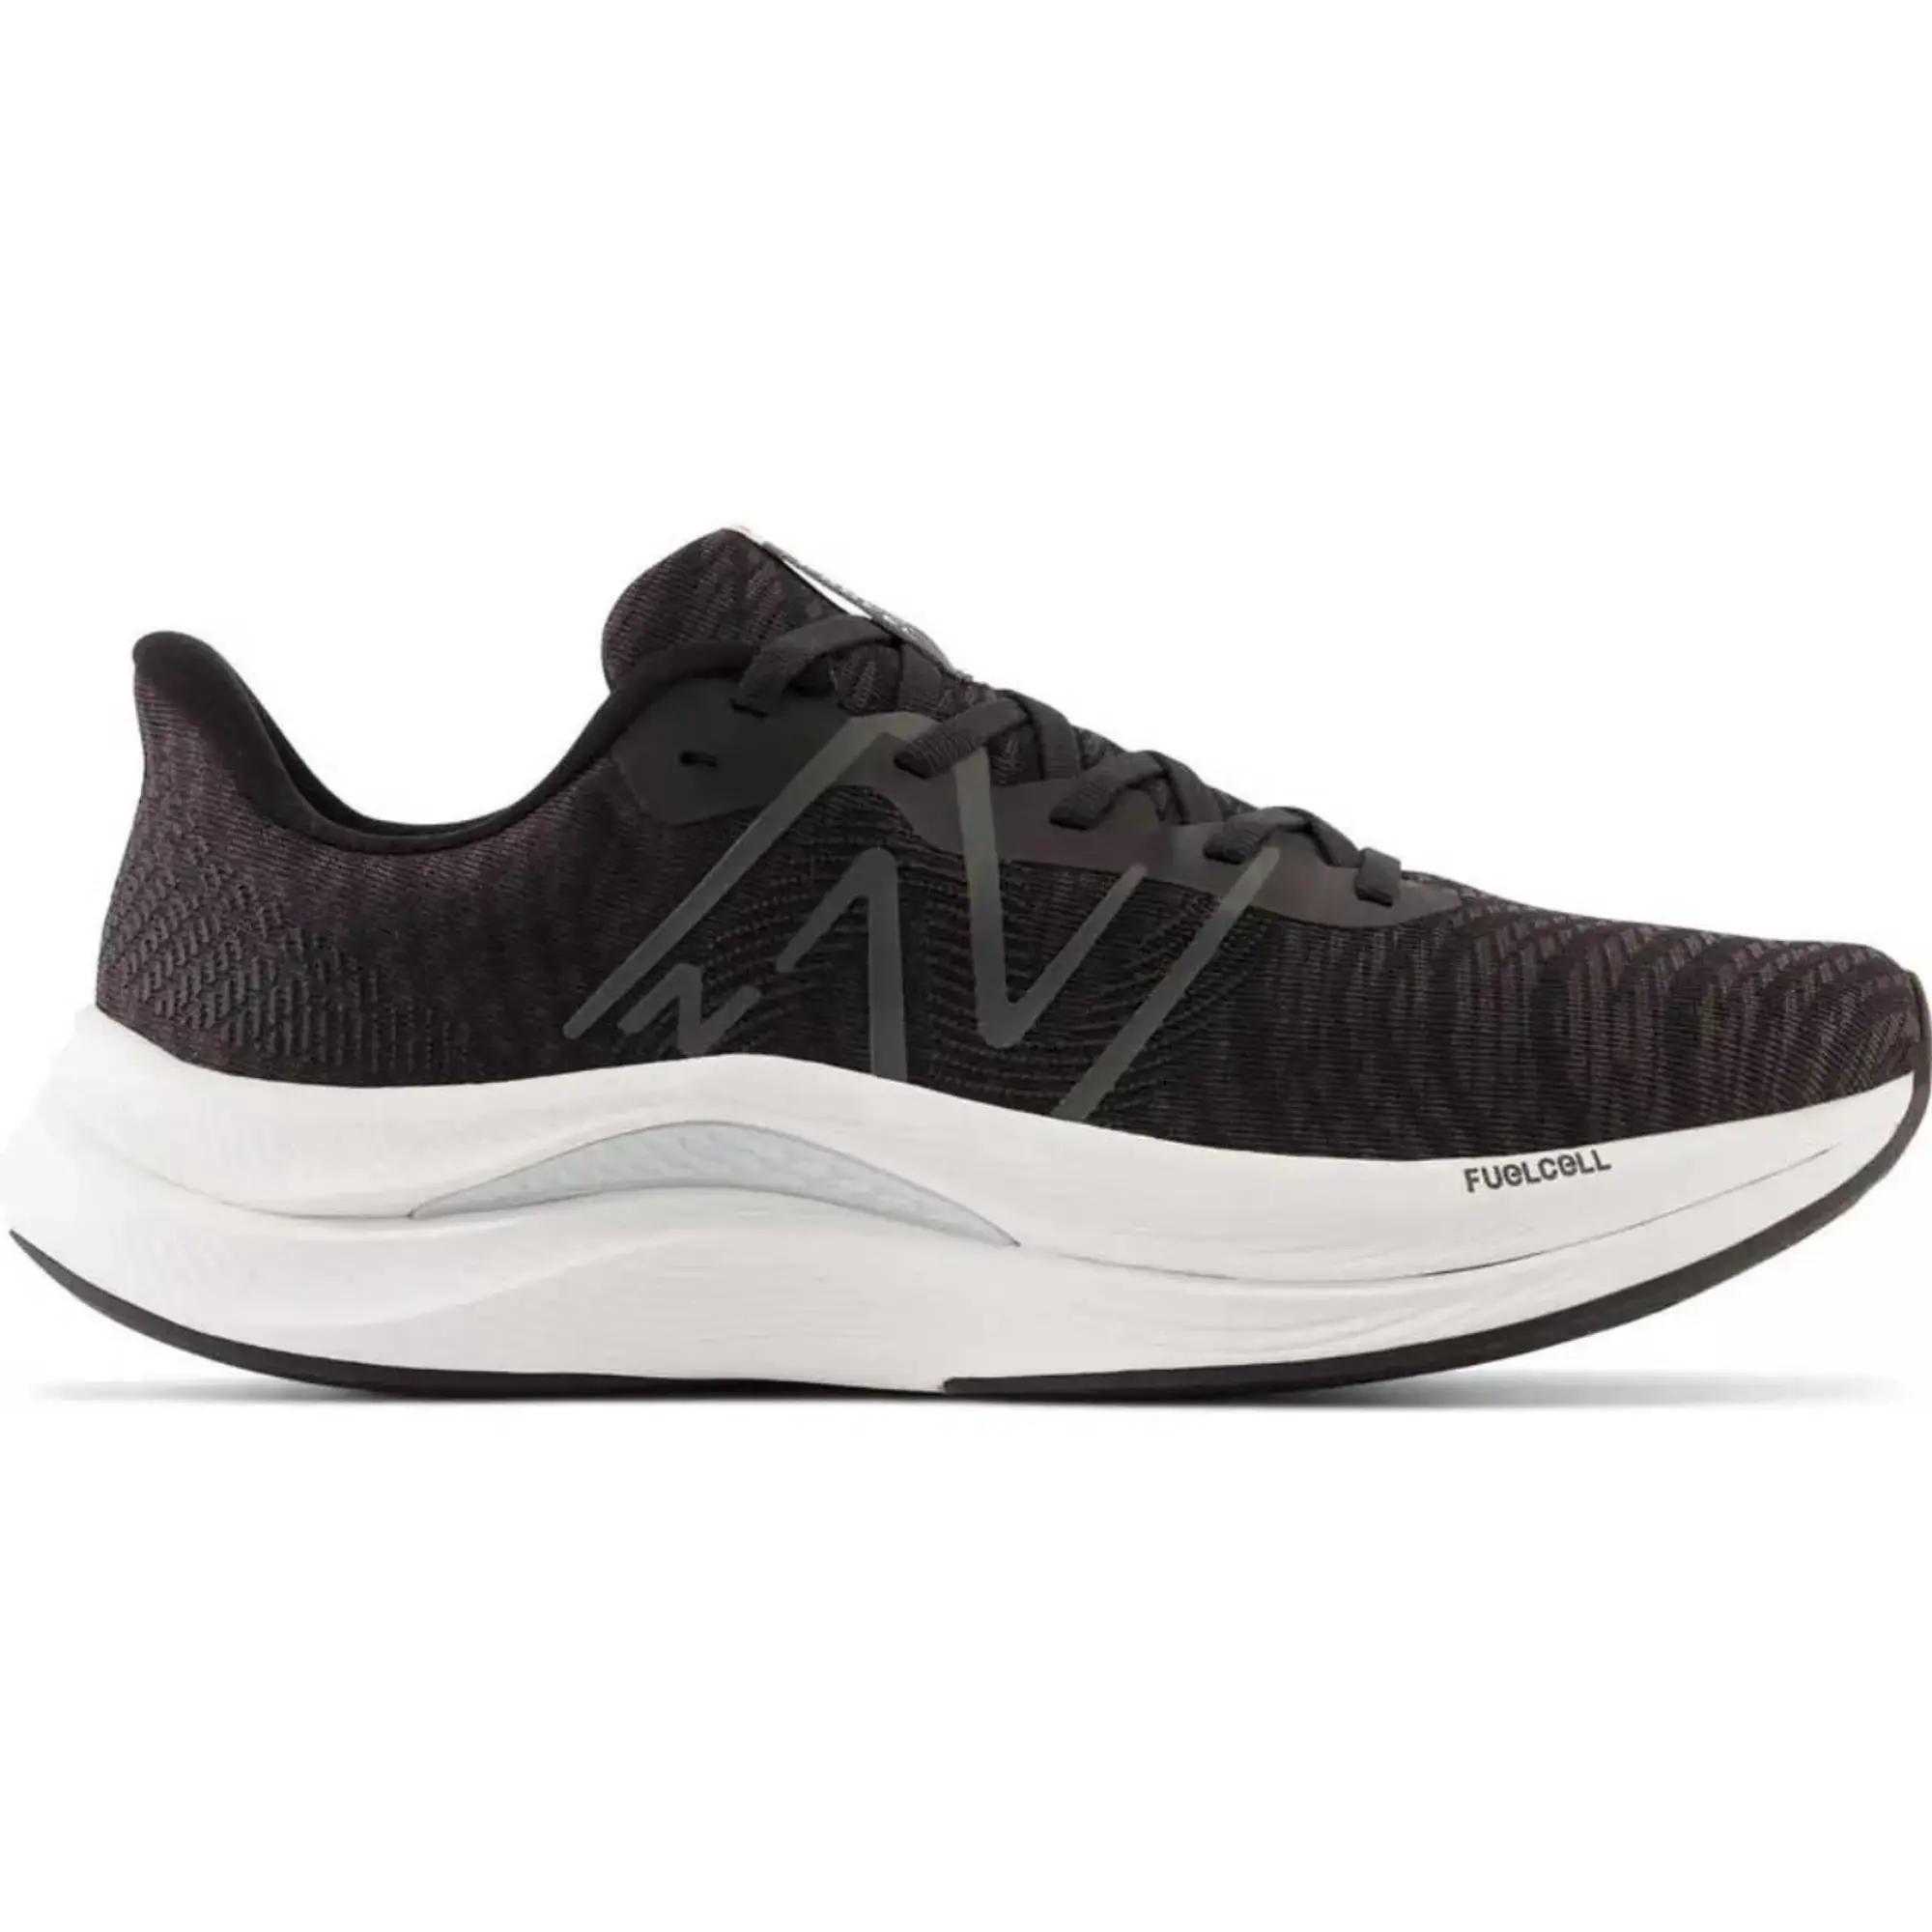 New Balance fuelcell propel v4 trainers in black